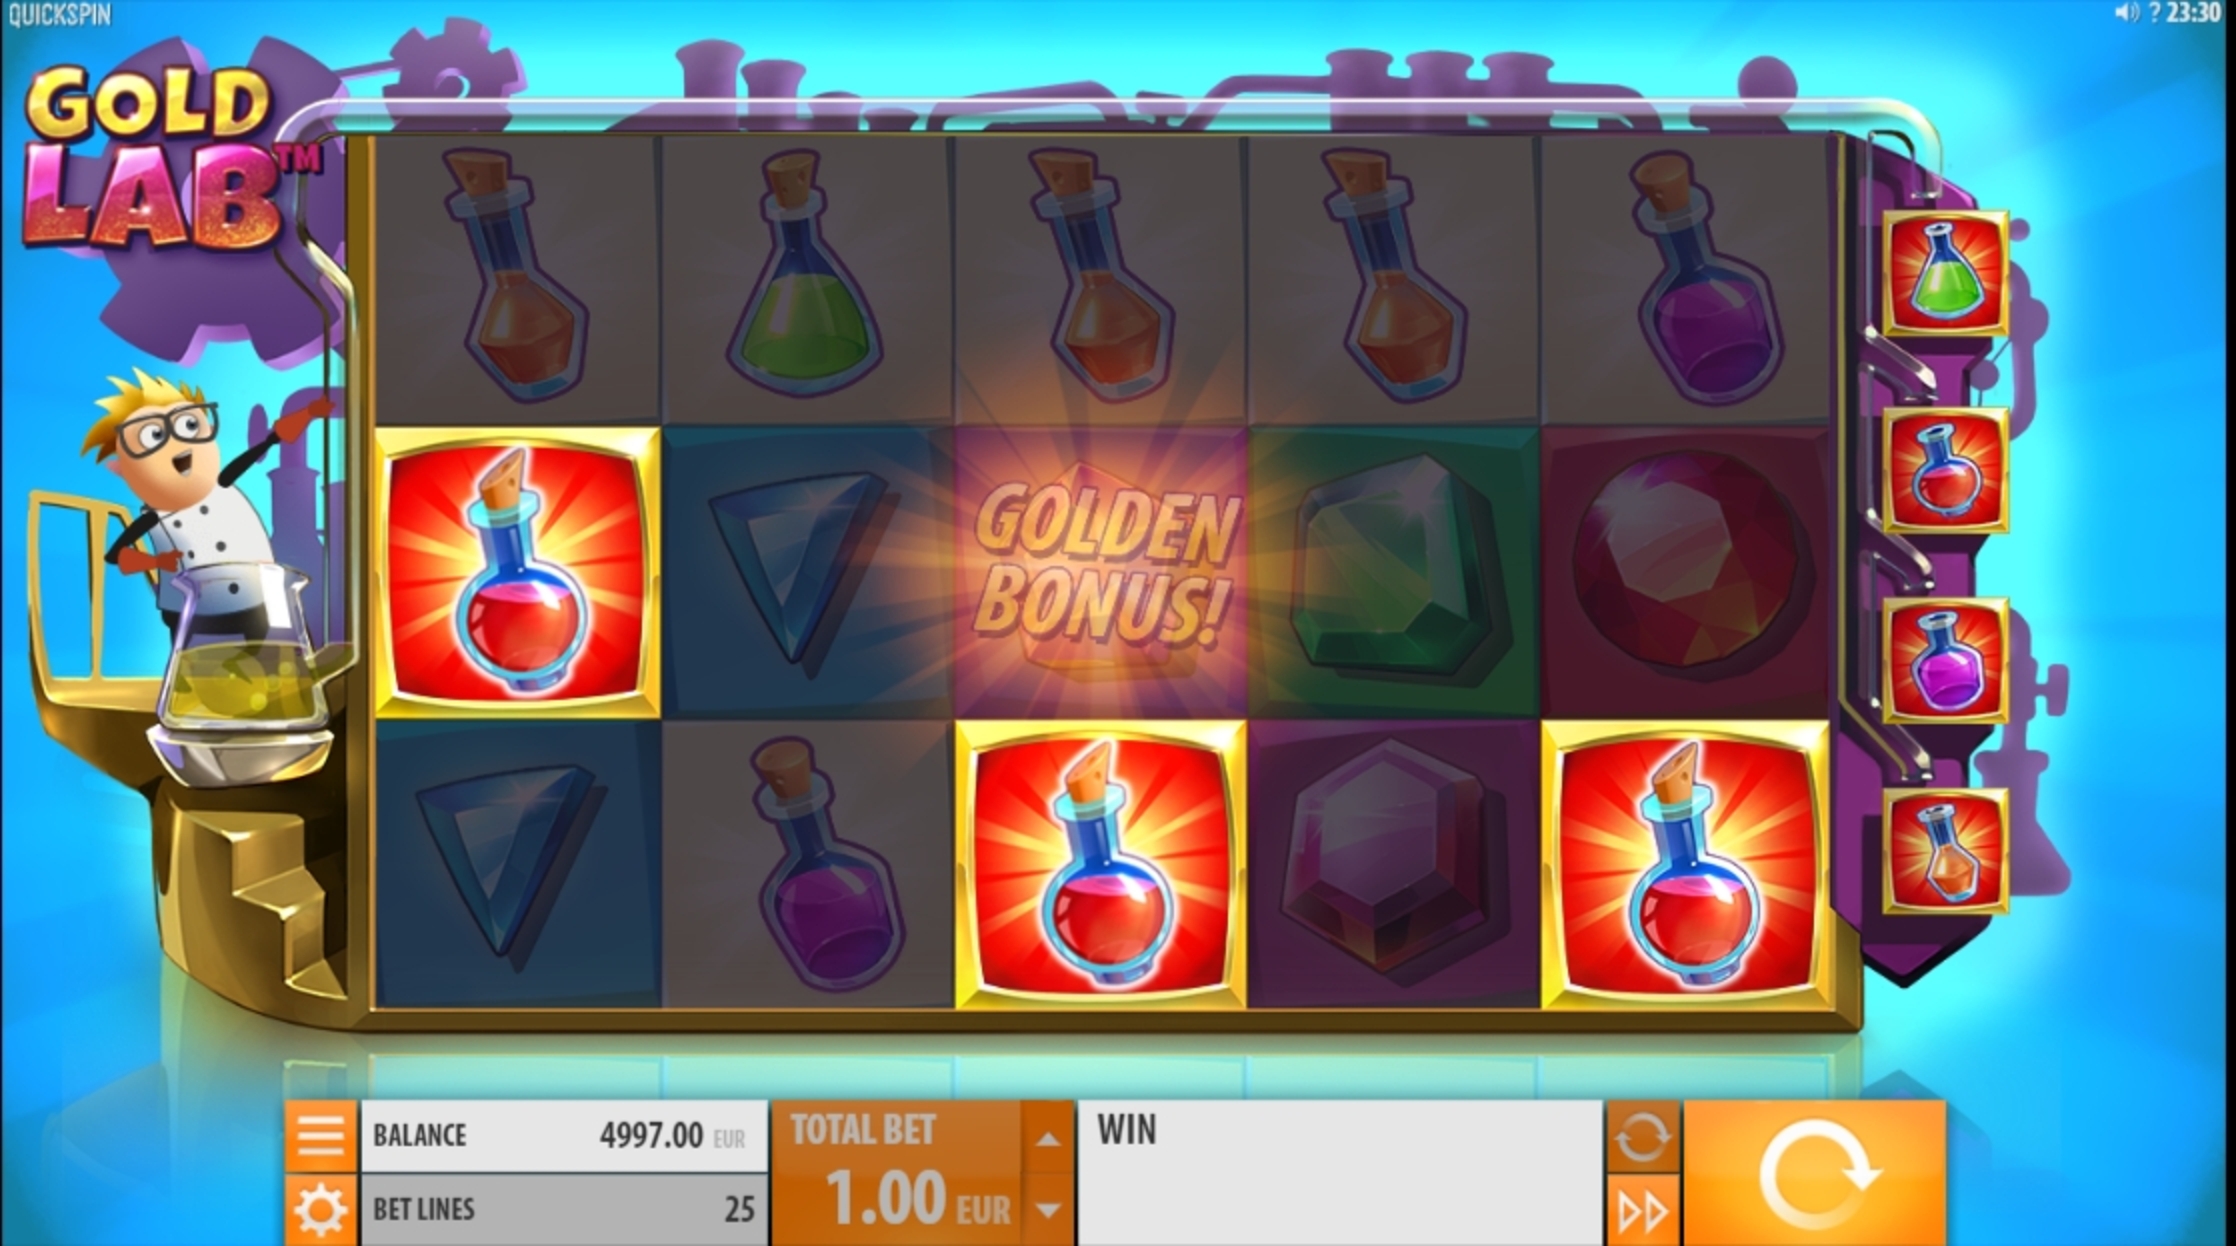 Win Money in Gold Lab Free Slot Game by Quickspin